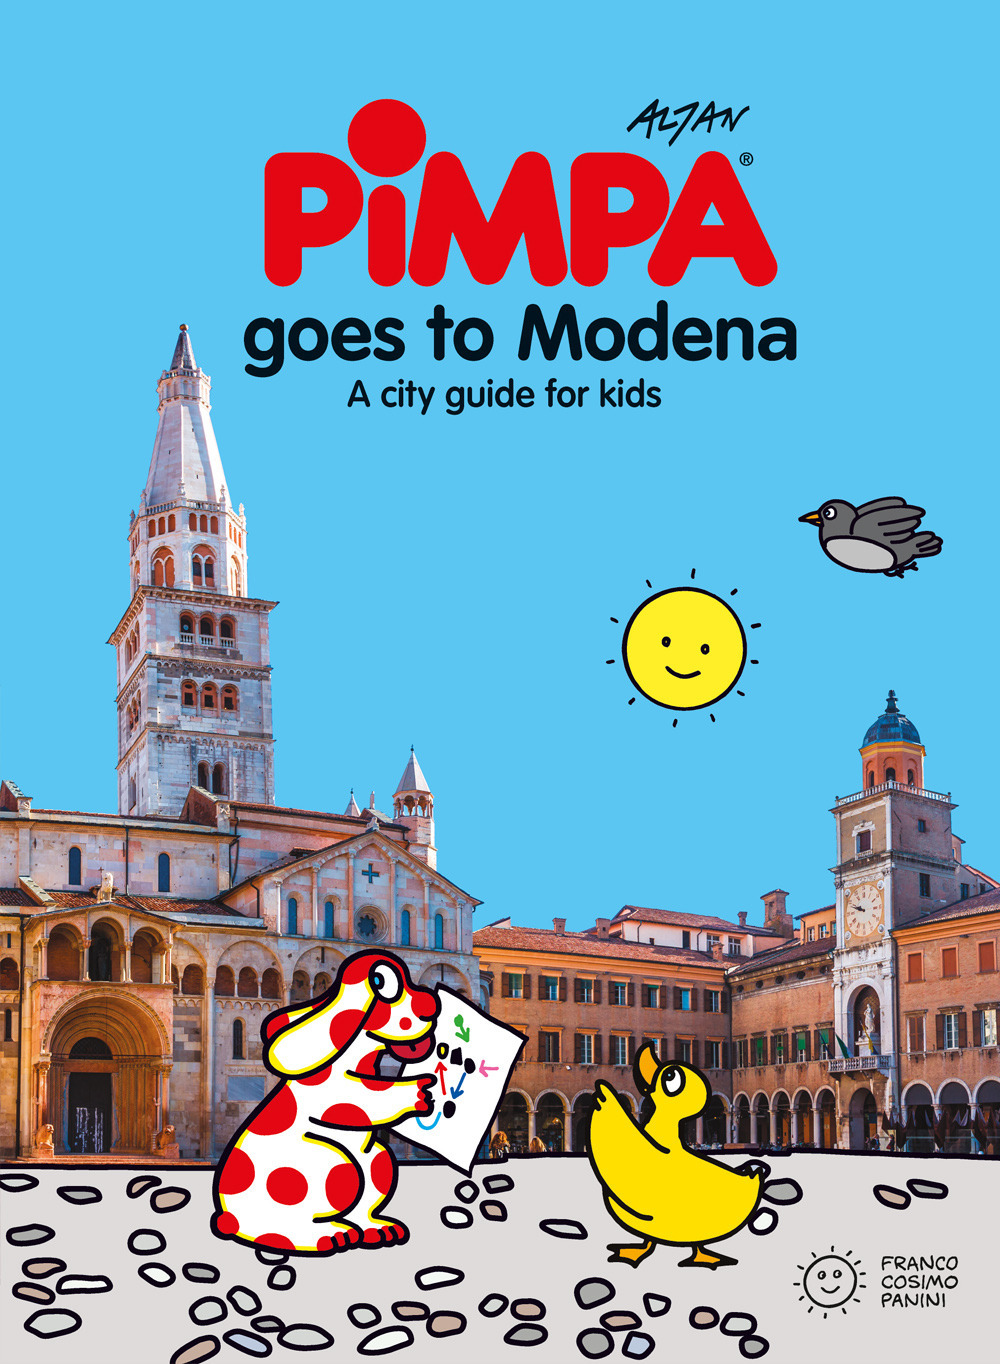 Pimpa goes to Modena. A city guide for kids